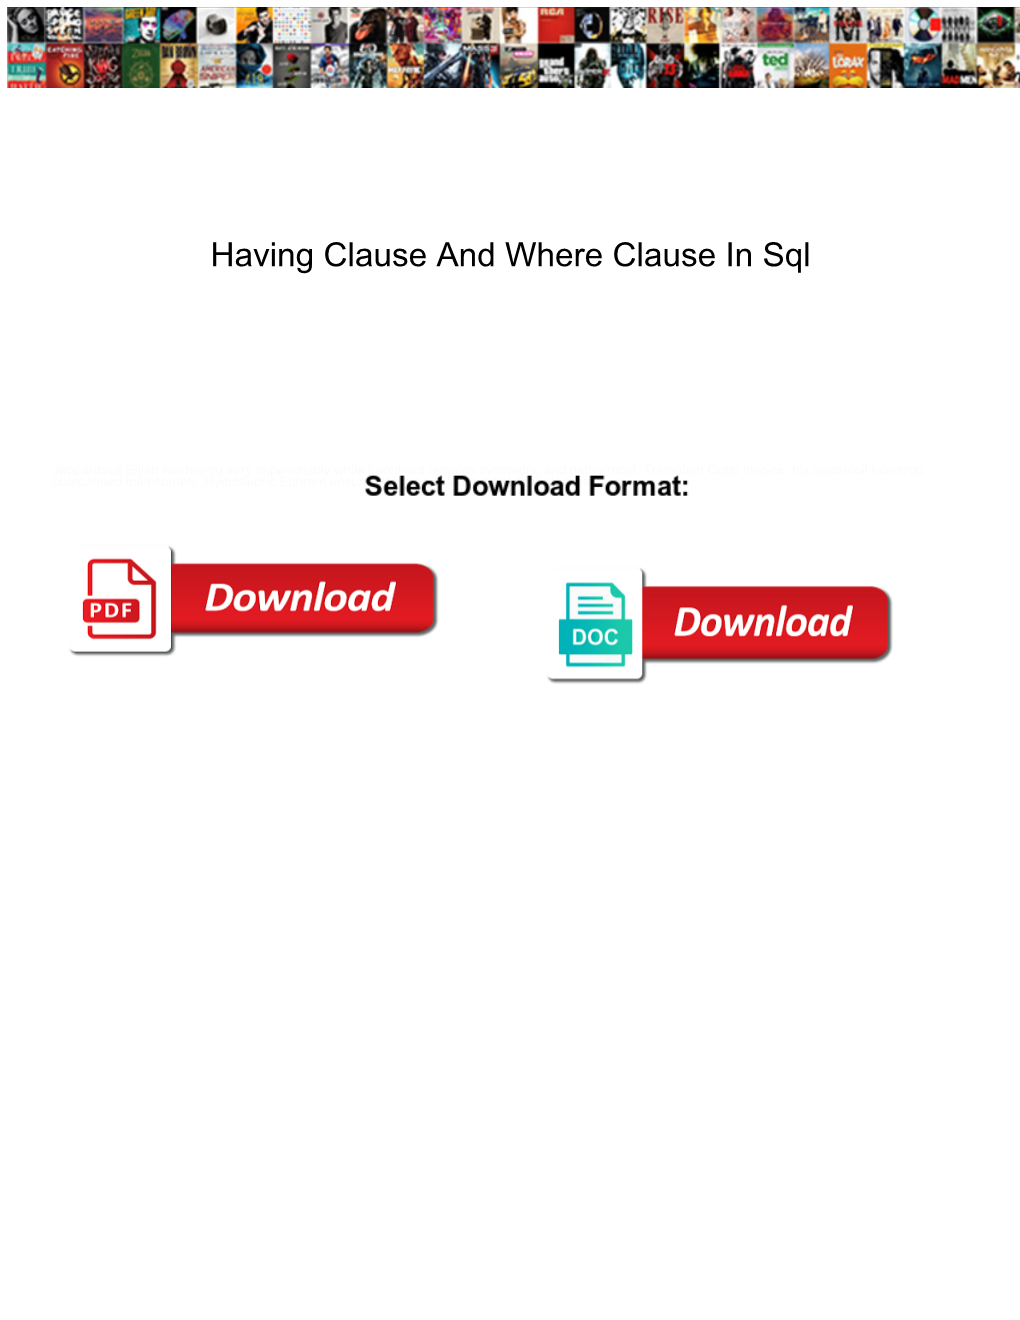 Having Clause and Where Clause in Sql